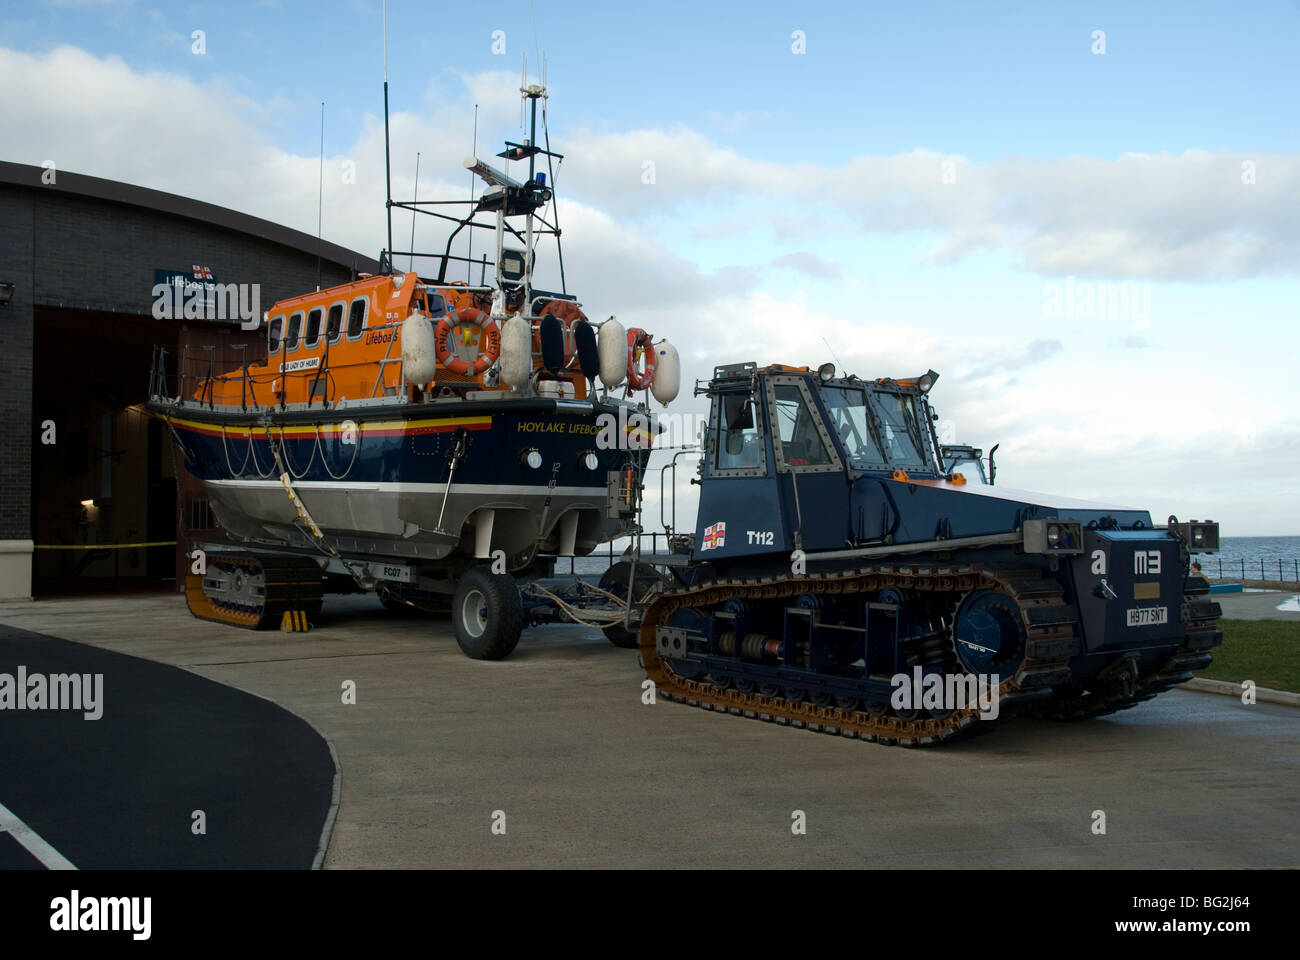 The Hoylake RNLI lifeboat (Lady of Hilbre) and tractor unit outside the new lifeboat station on the Wirral peninsula Stock Photo